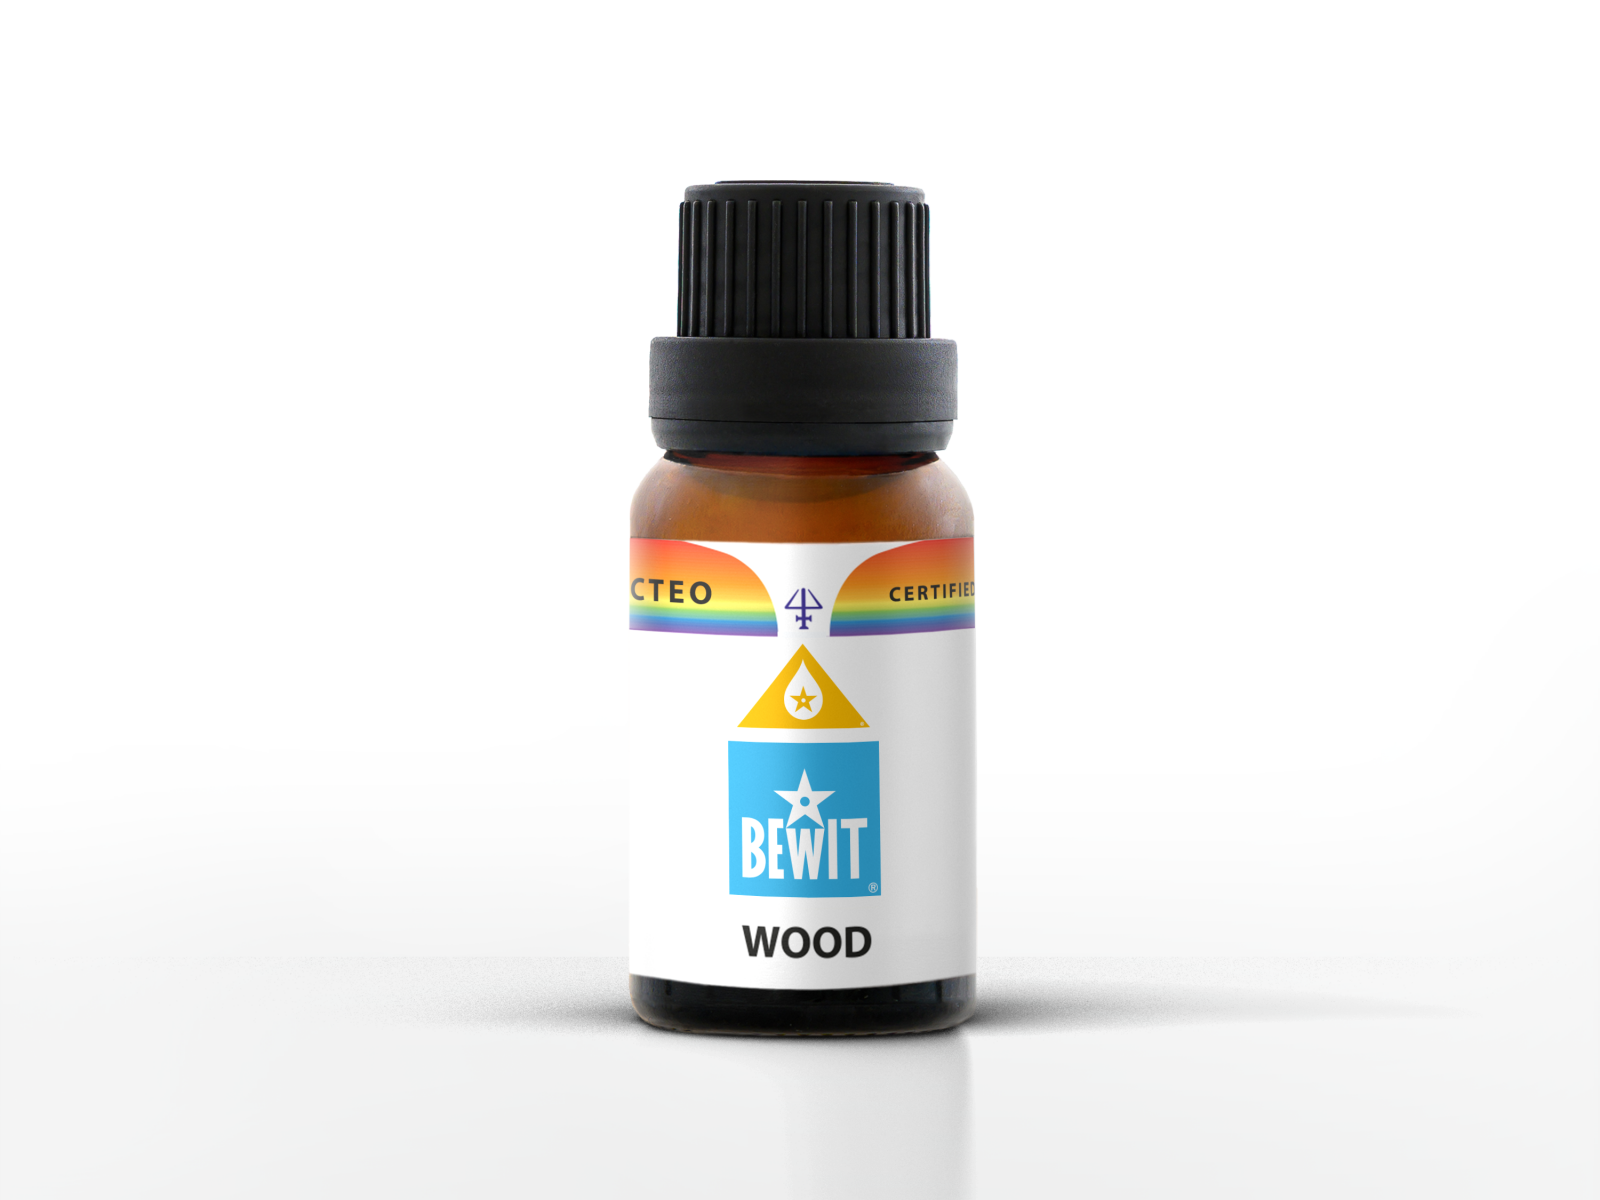 BEWIT WOOD - A blend of essential oils. - 1